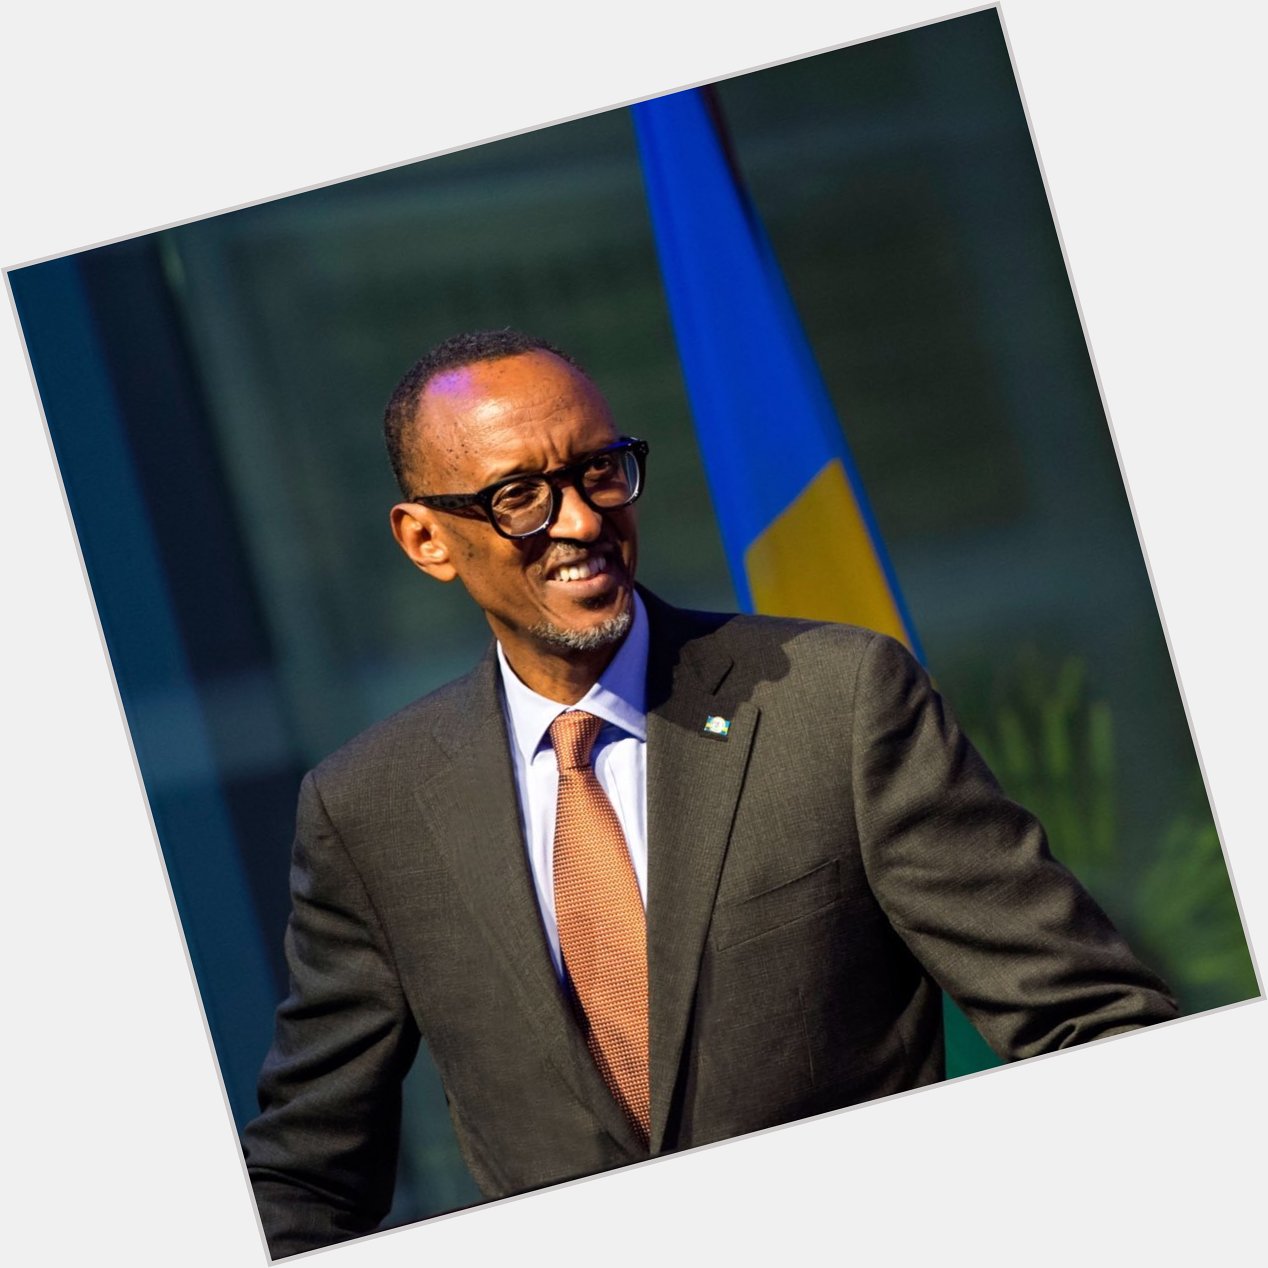 Happy birthday E. Paul Kagame
You give us your time and energy till today. More blessings 